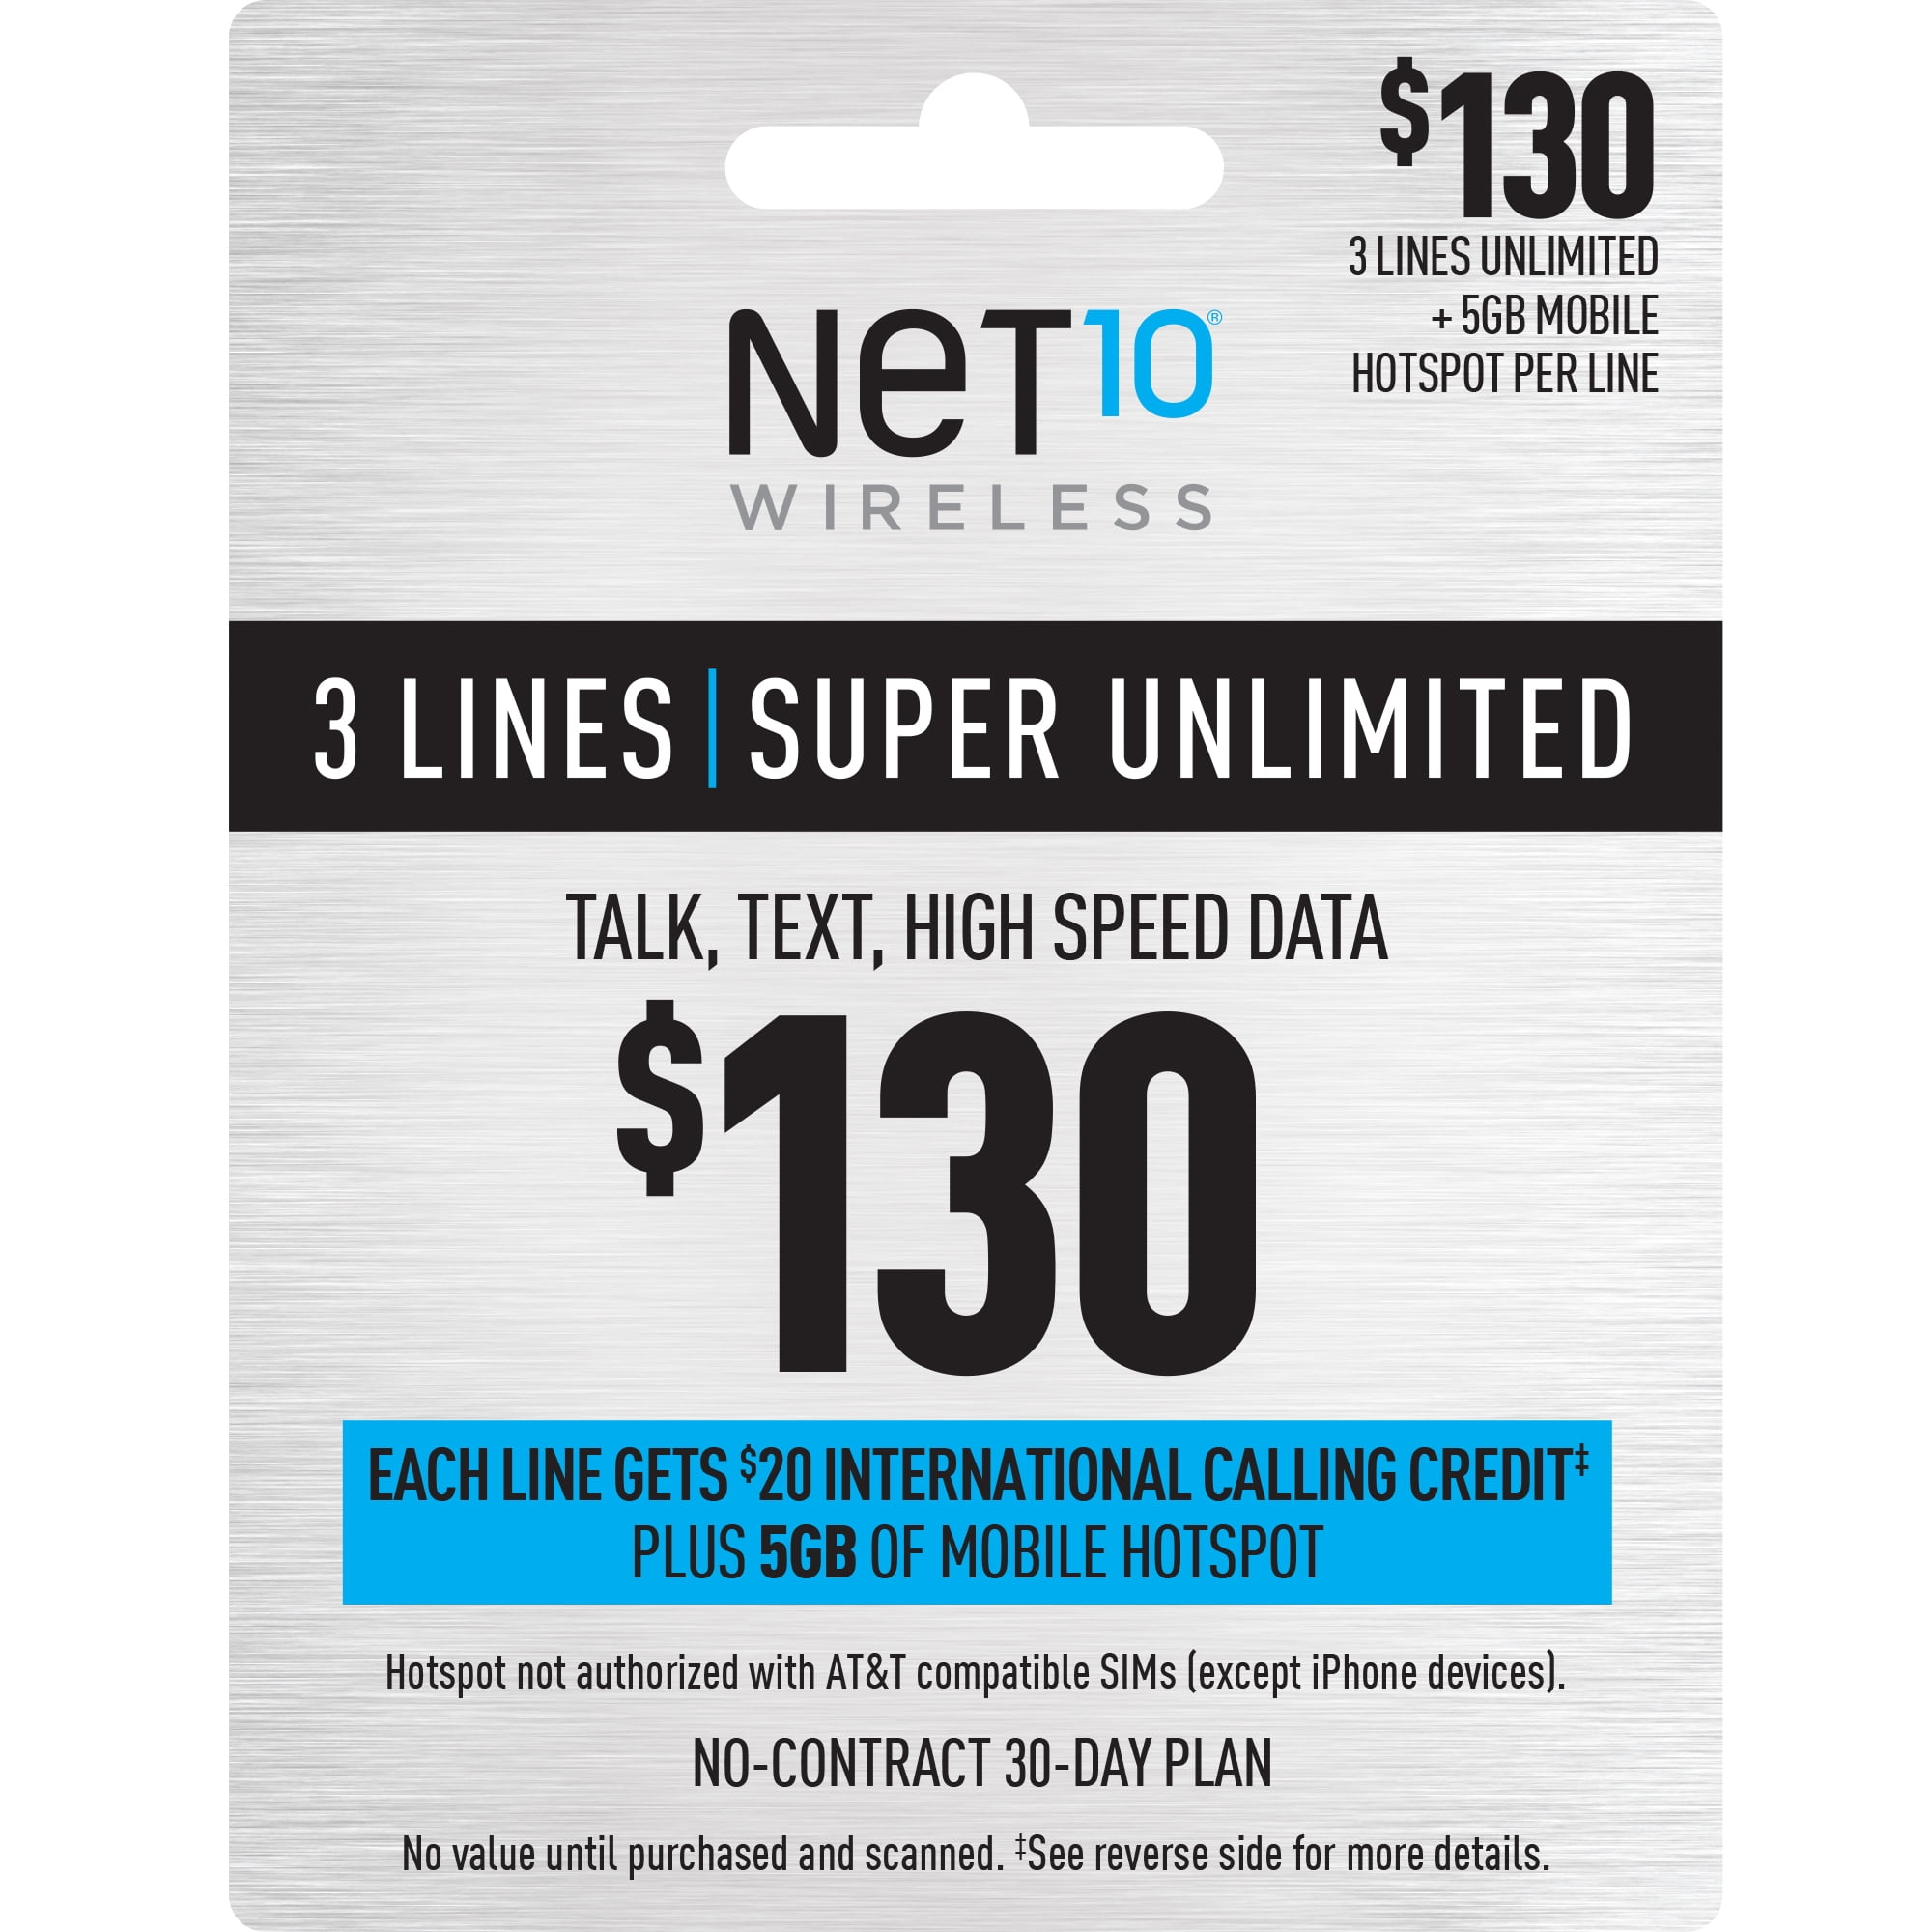 NET10 Wireless $130 Unlimited Family & Friends 30-Day Plan for 3 Lines with Int'l Calling Credit + of Mobile Hotspot e-PIN Top (Email Delivery) - Walmart.com